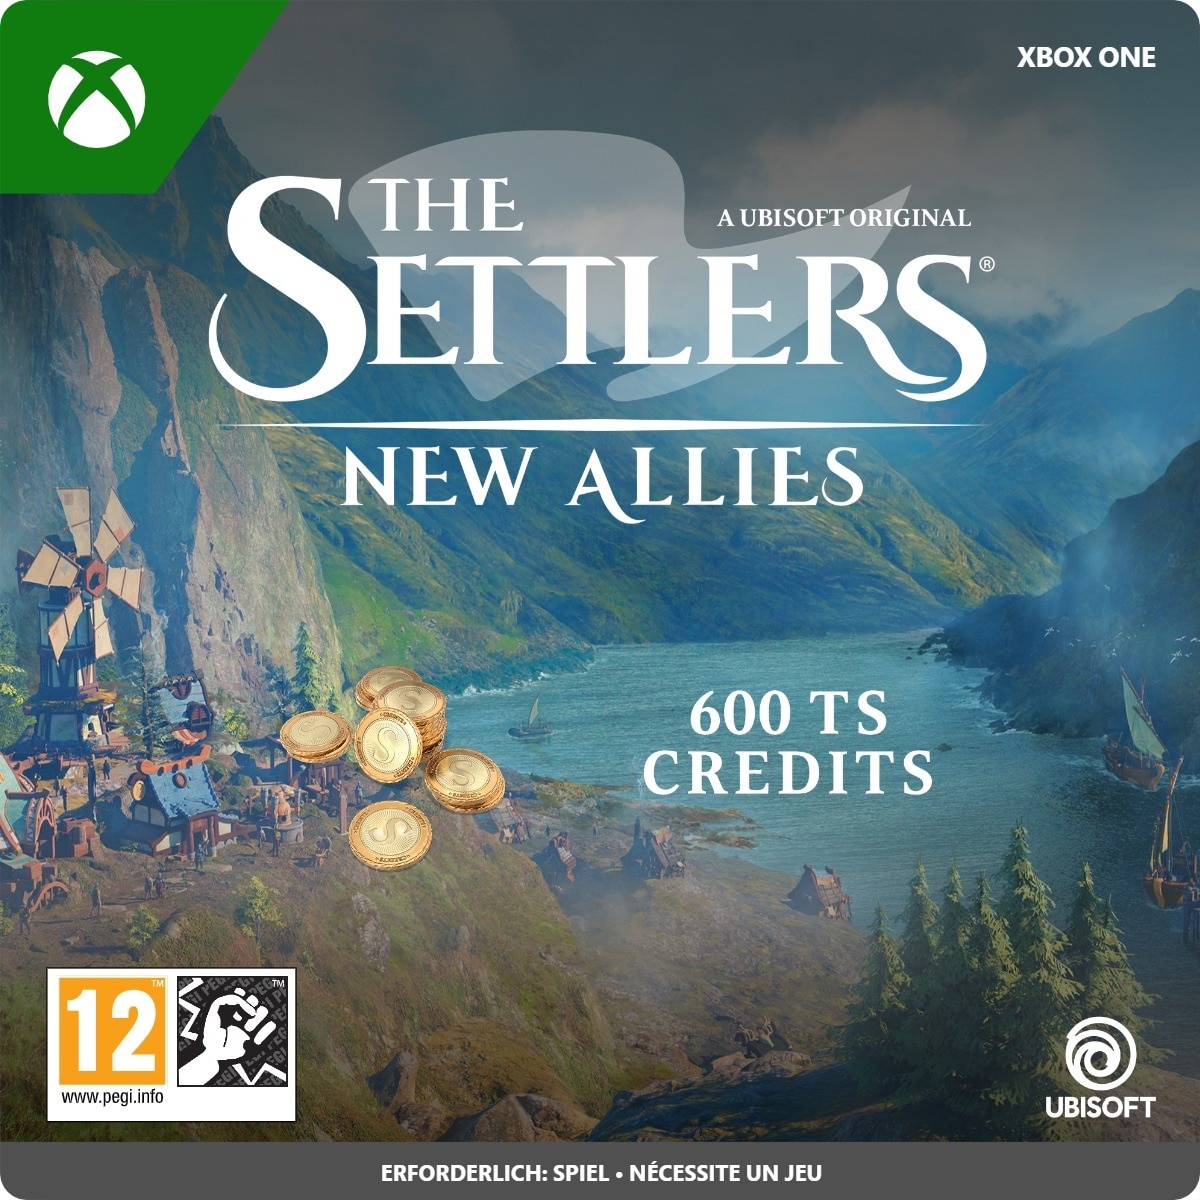 Xbox The Settlers New Allies Virtual Currency 600 Credits Download Code (Xbox) zum Sofortdownload